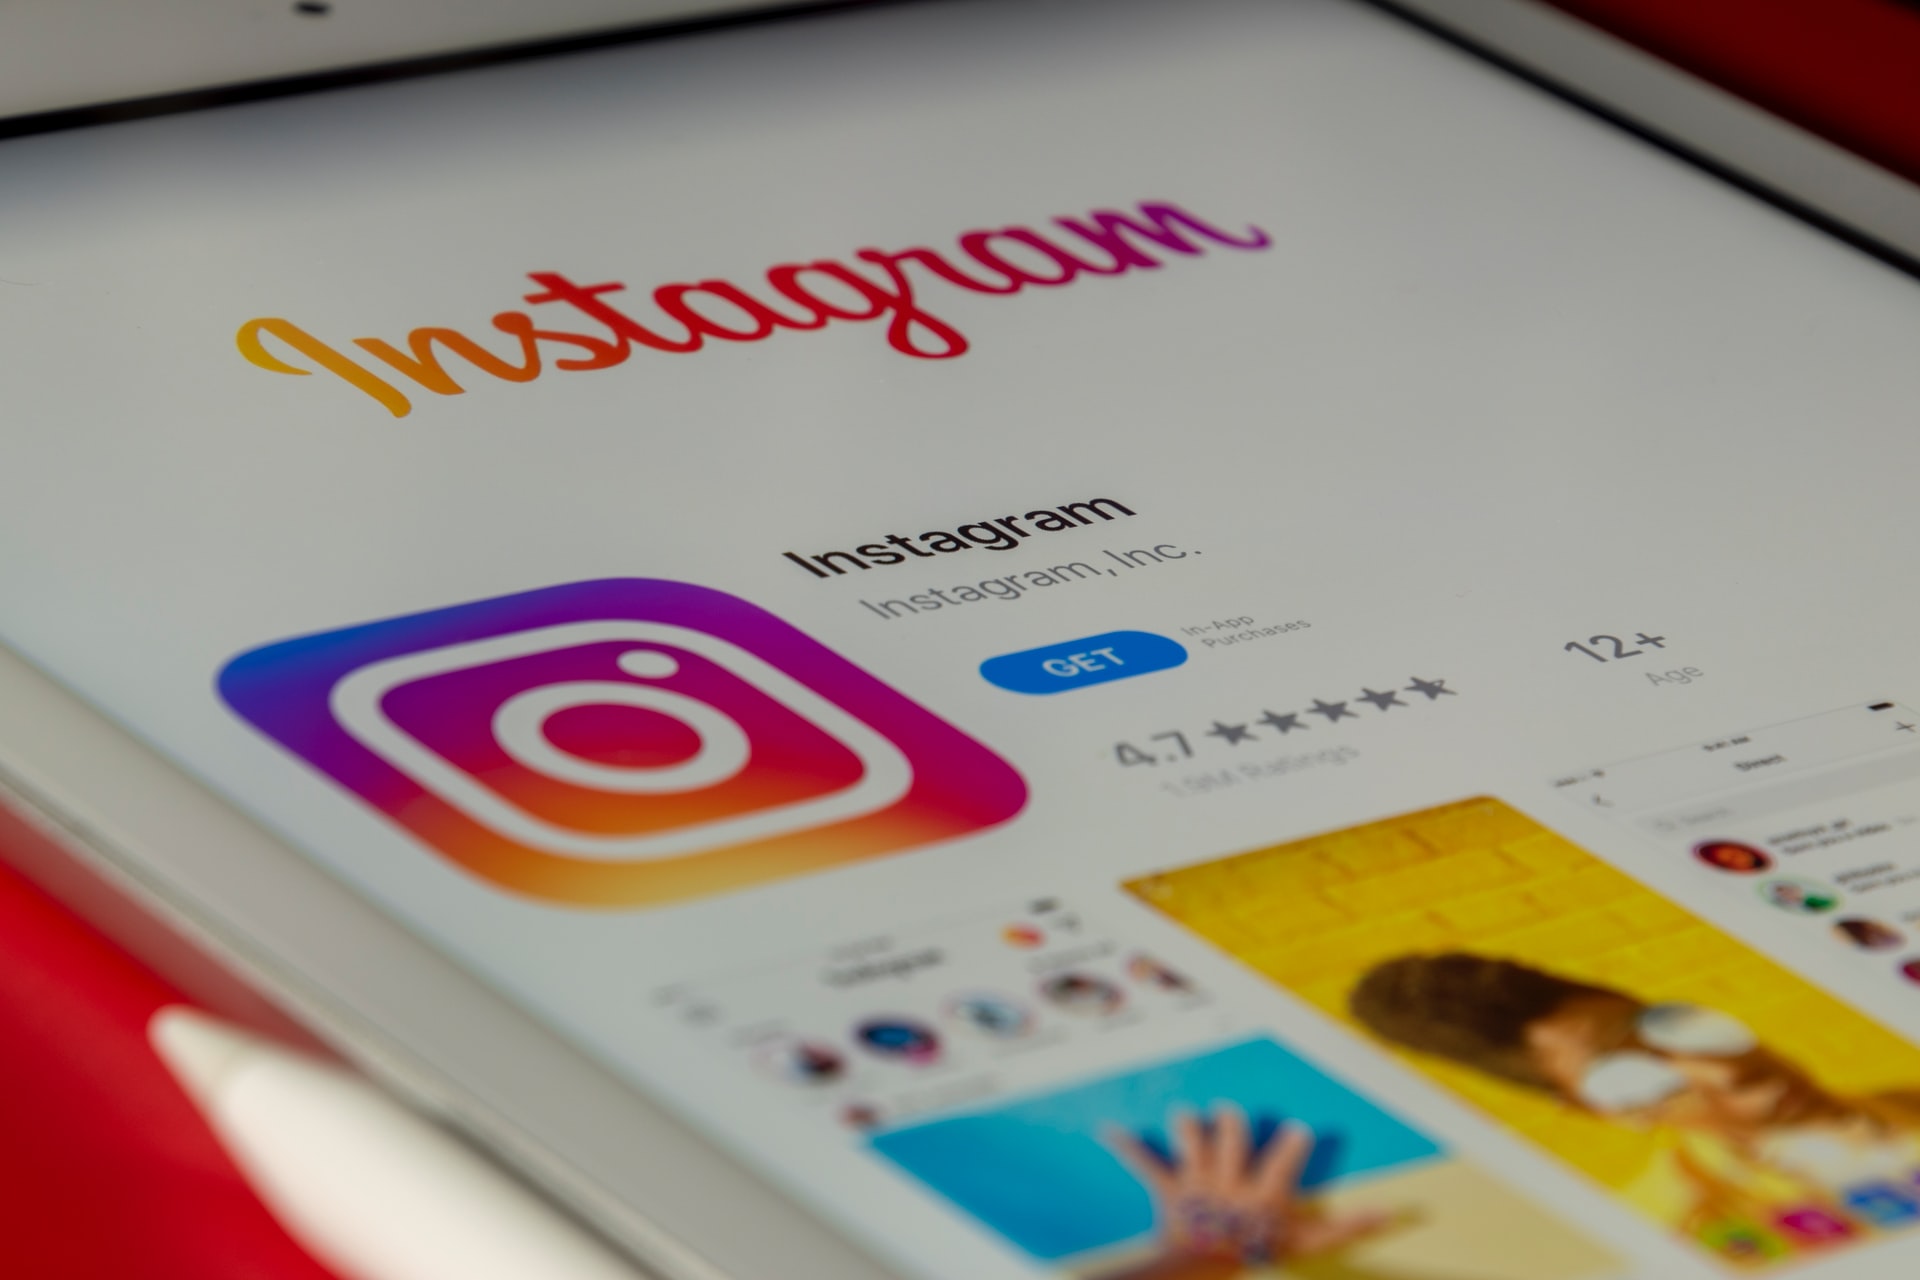 Should You Buy Instagram Followers? The Pros and Cons